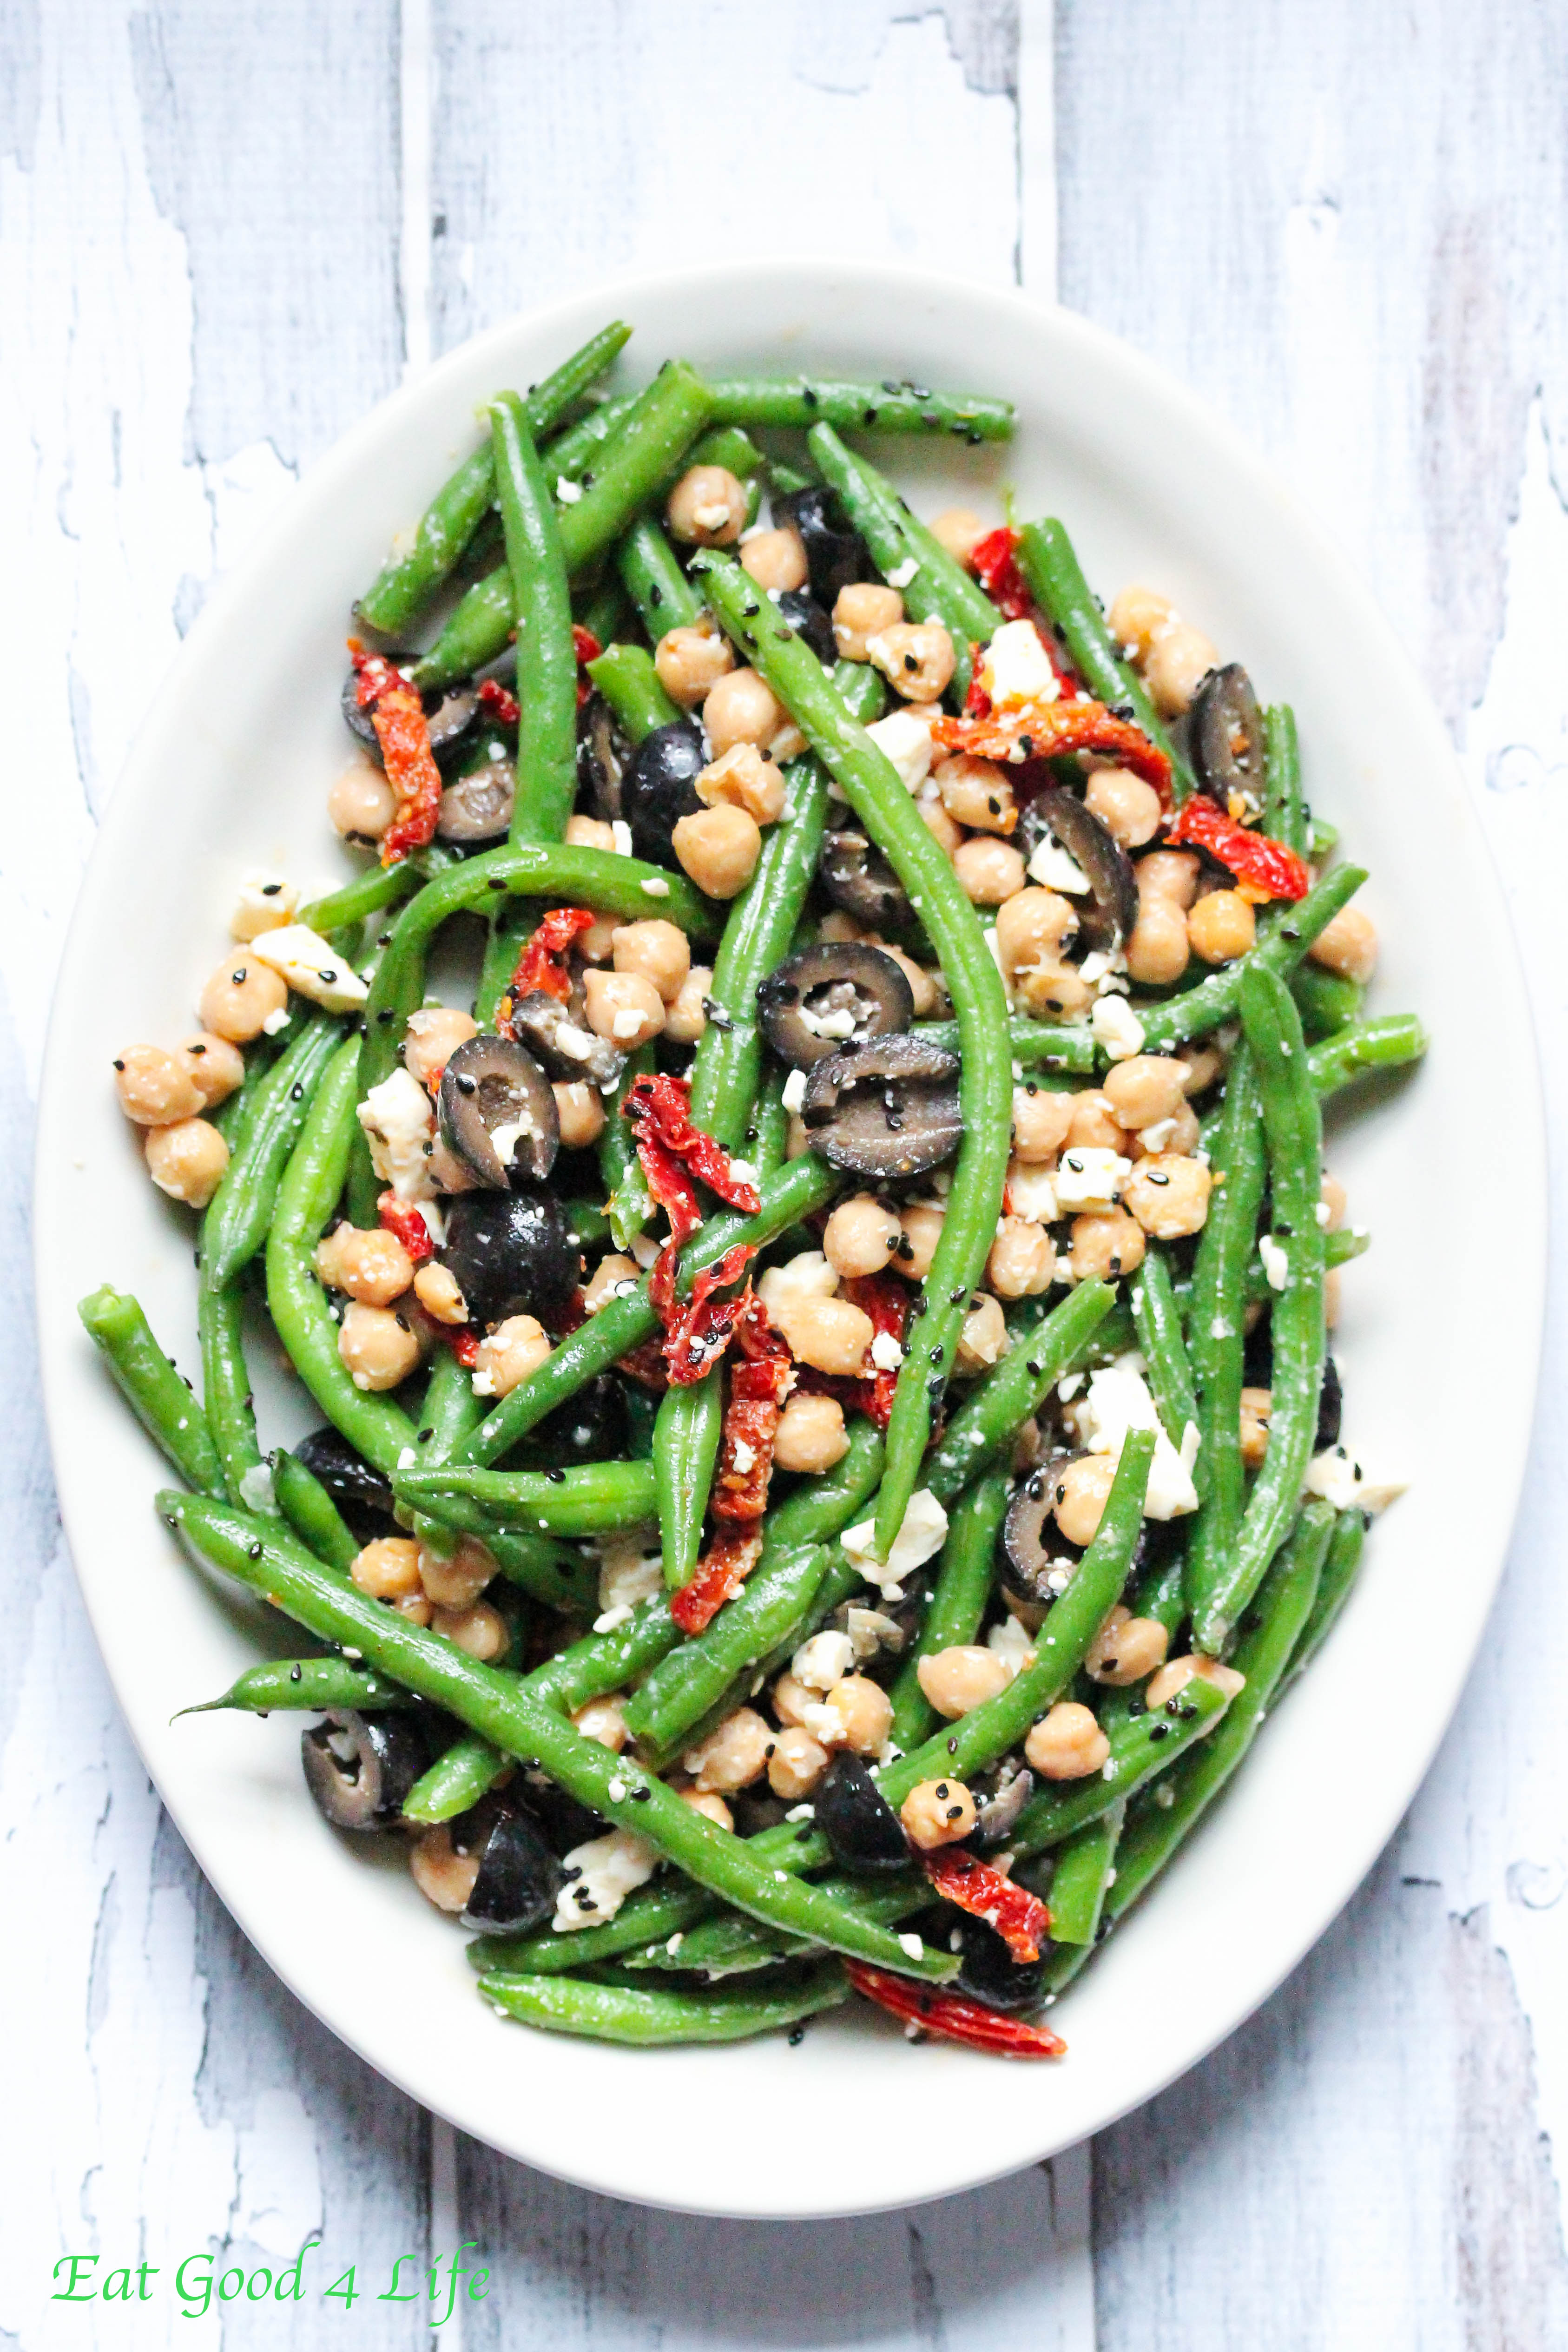 Top 15 Most Popular Green Bean Salad Easy Recipes To Make At Home